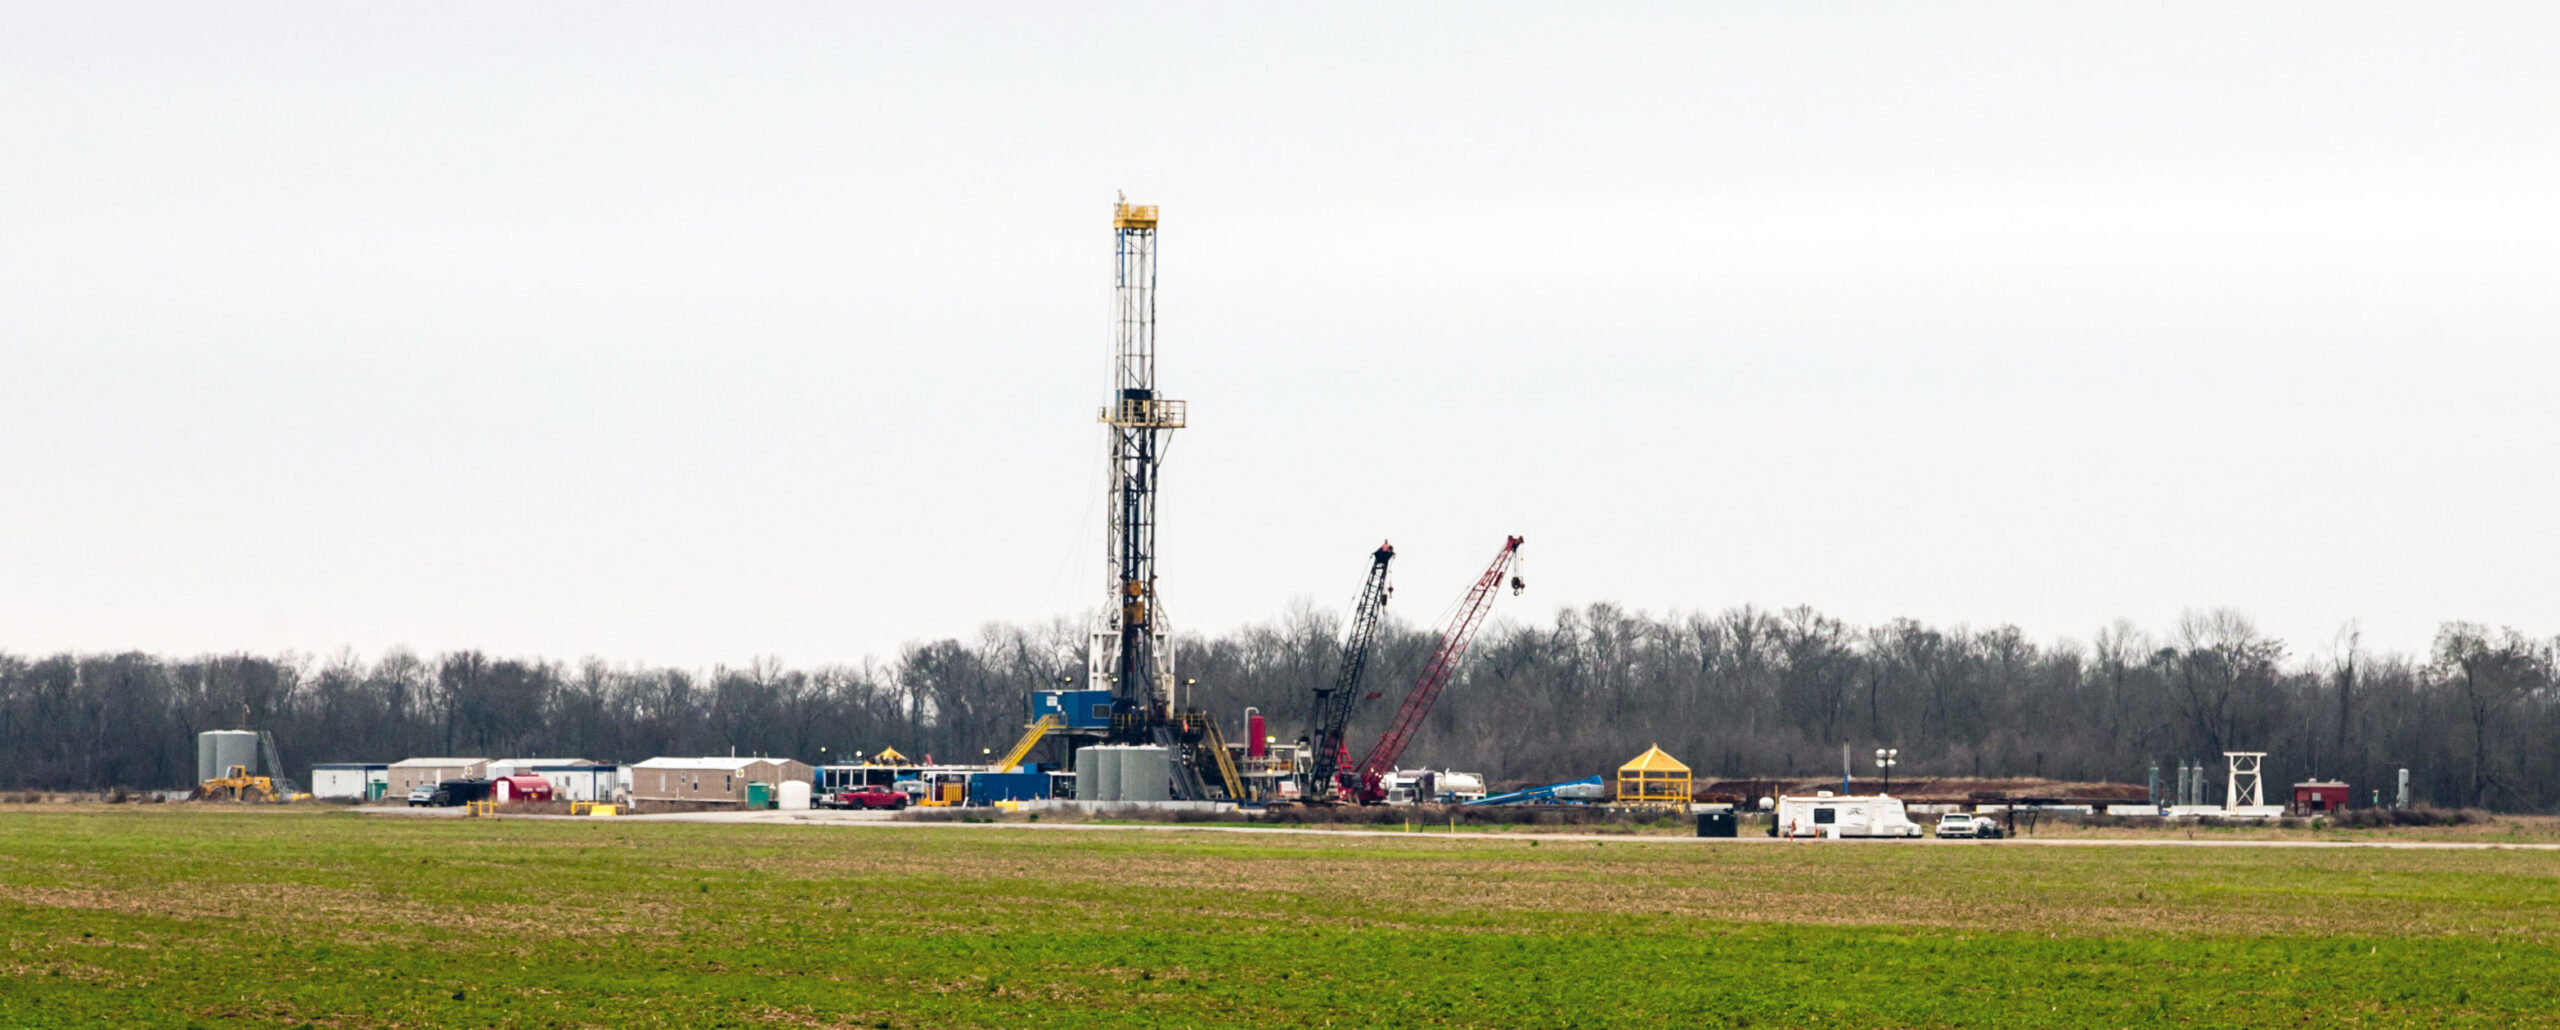 Photograph of a drill rig and associated equipment for fracking natural gas in the Haynesville Shale, Louisiana, 2013.